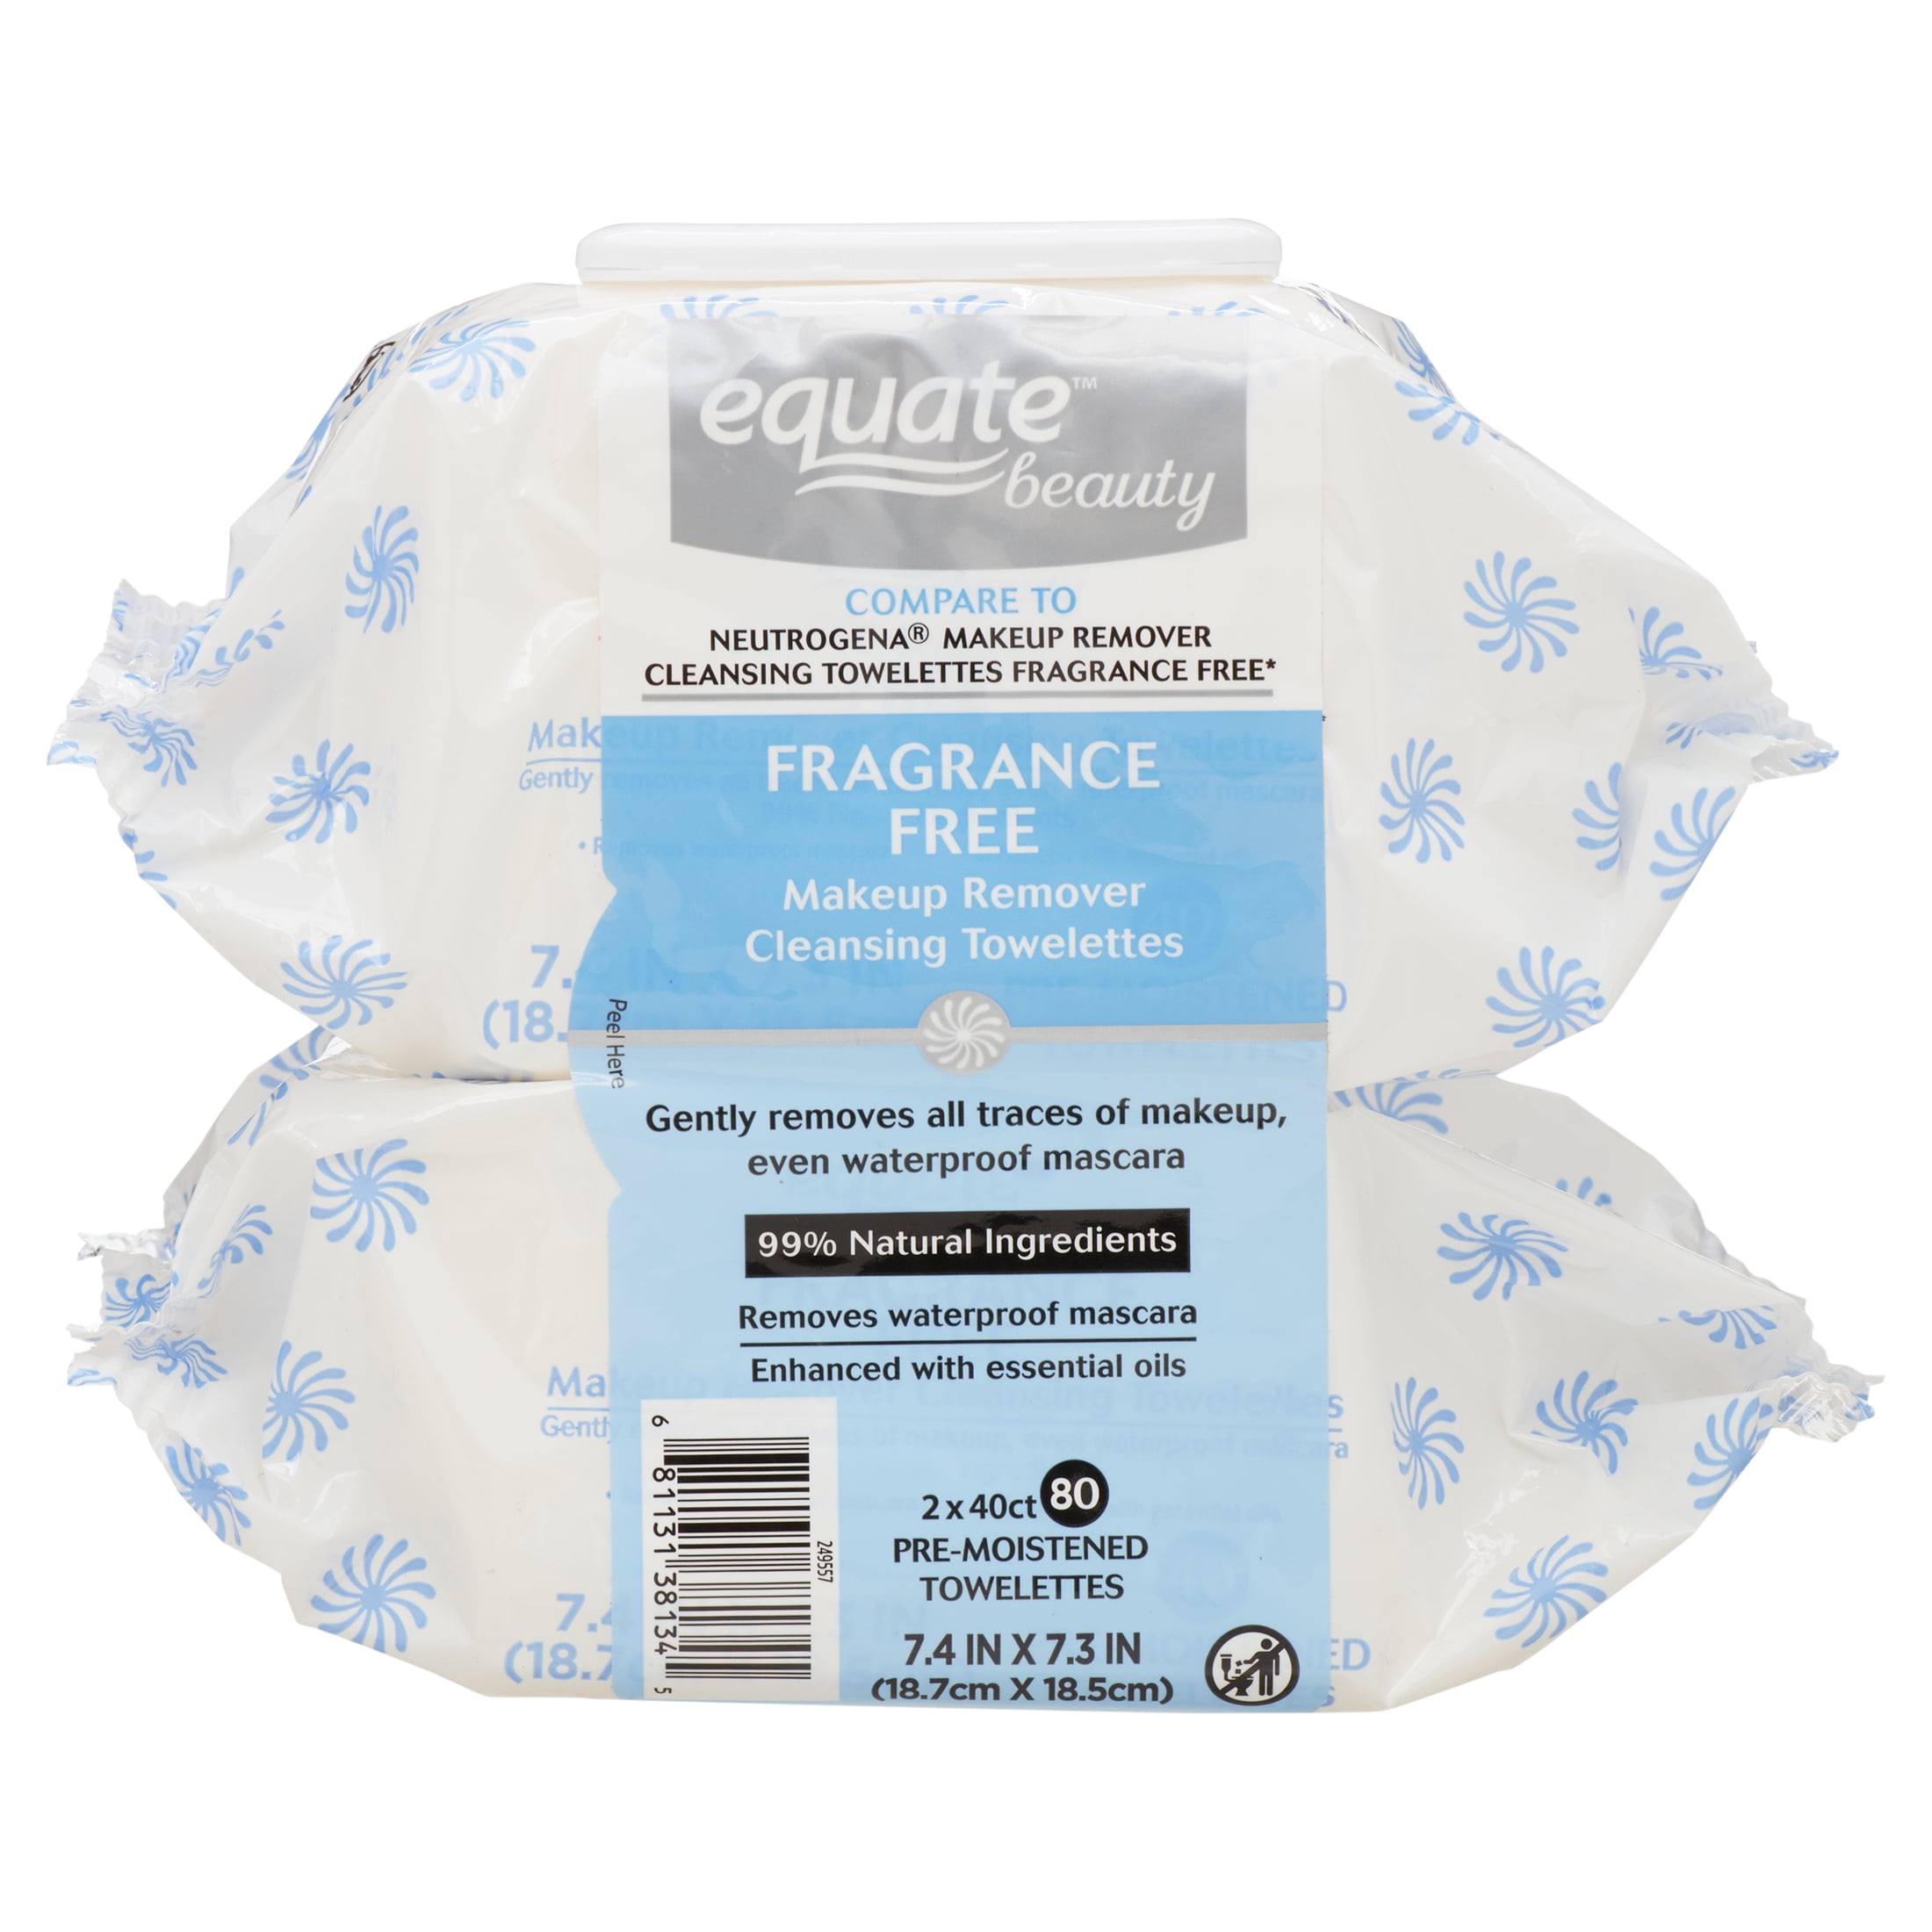 Equate Facial Beauty Fragrance-Free Cleansing & Makeup Remover Towelettes, 80 Count, Pack - Walmart.com